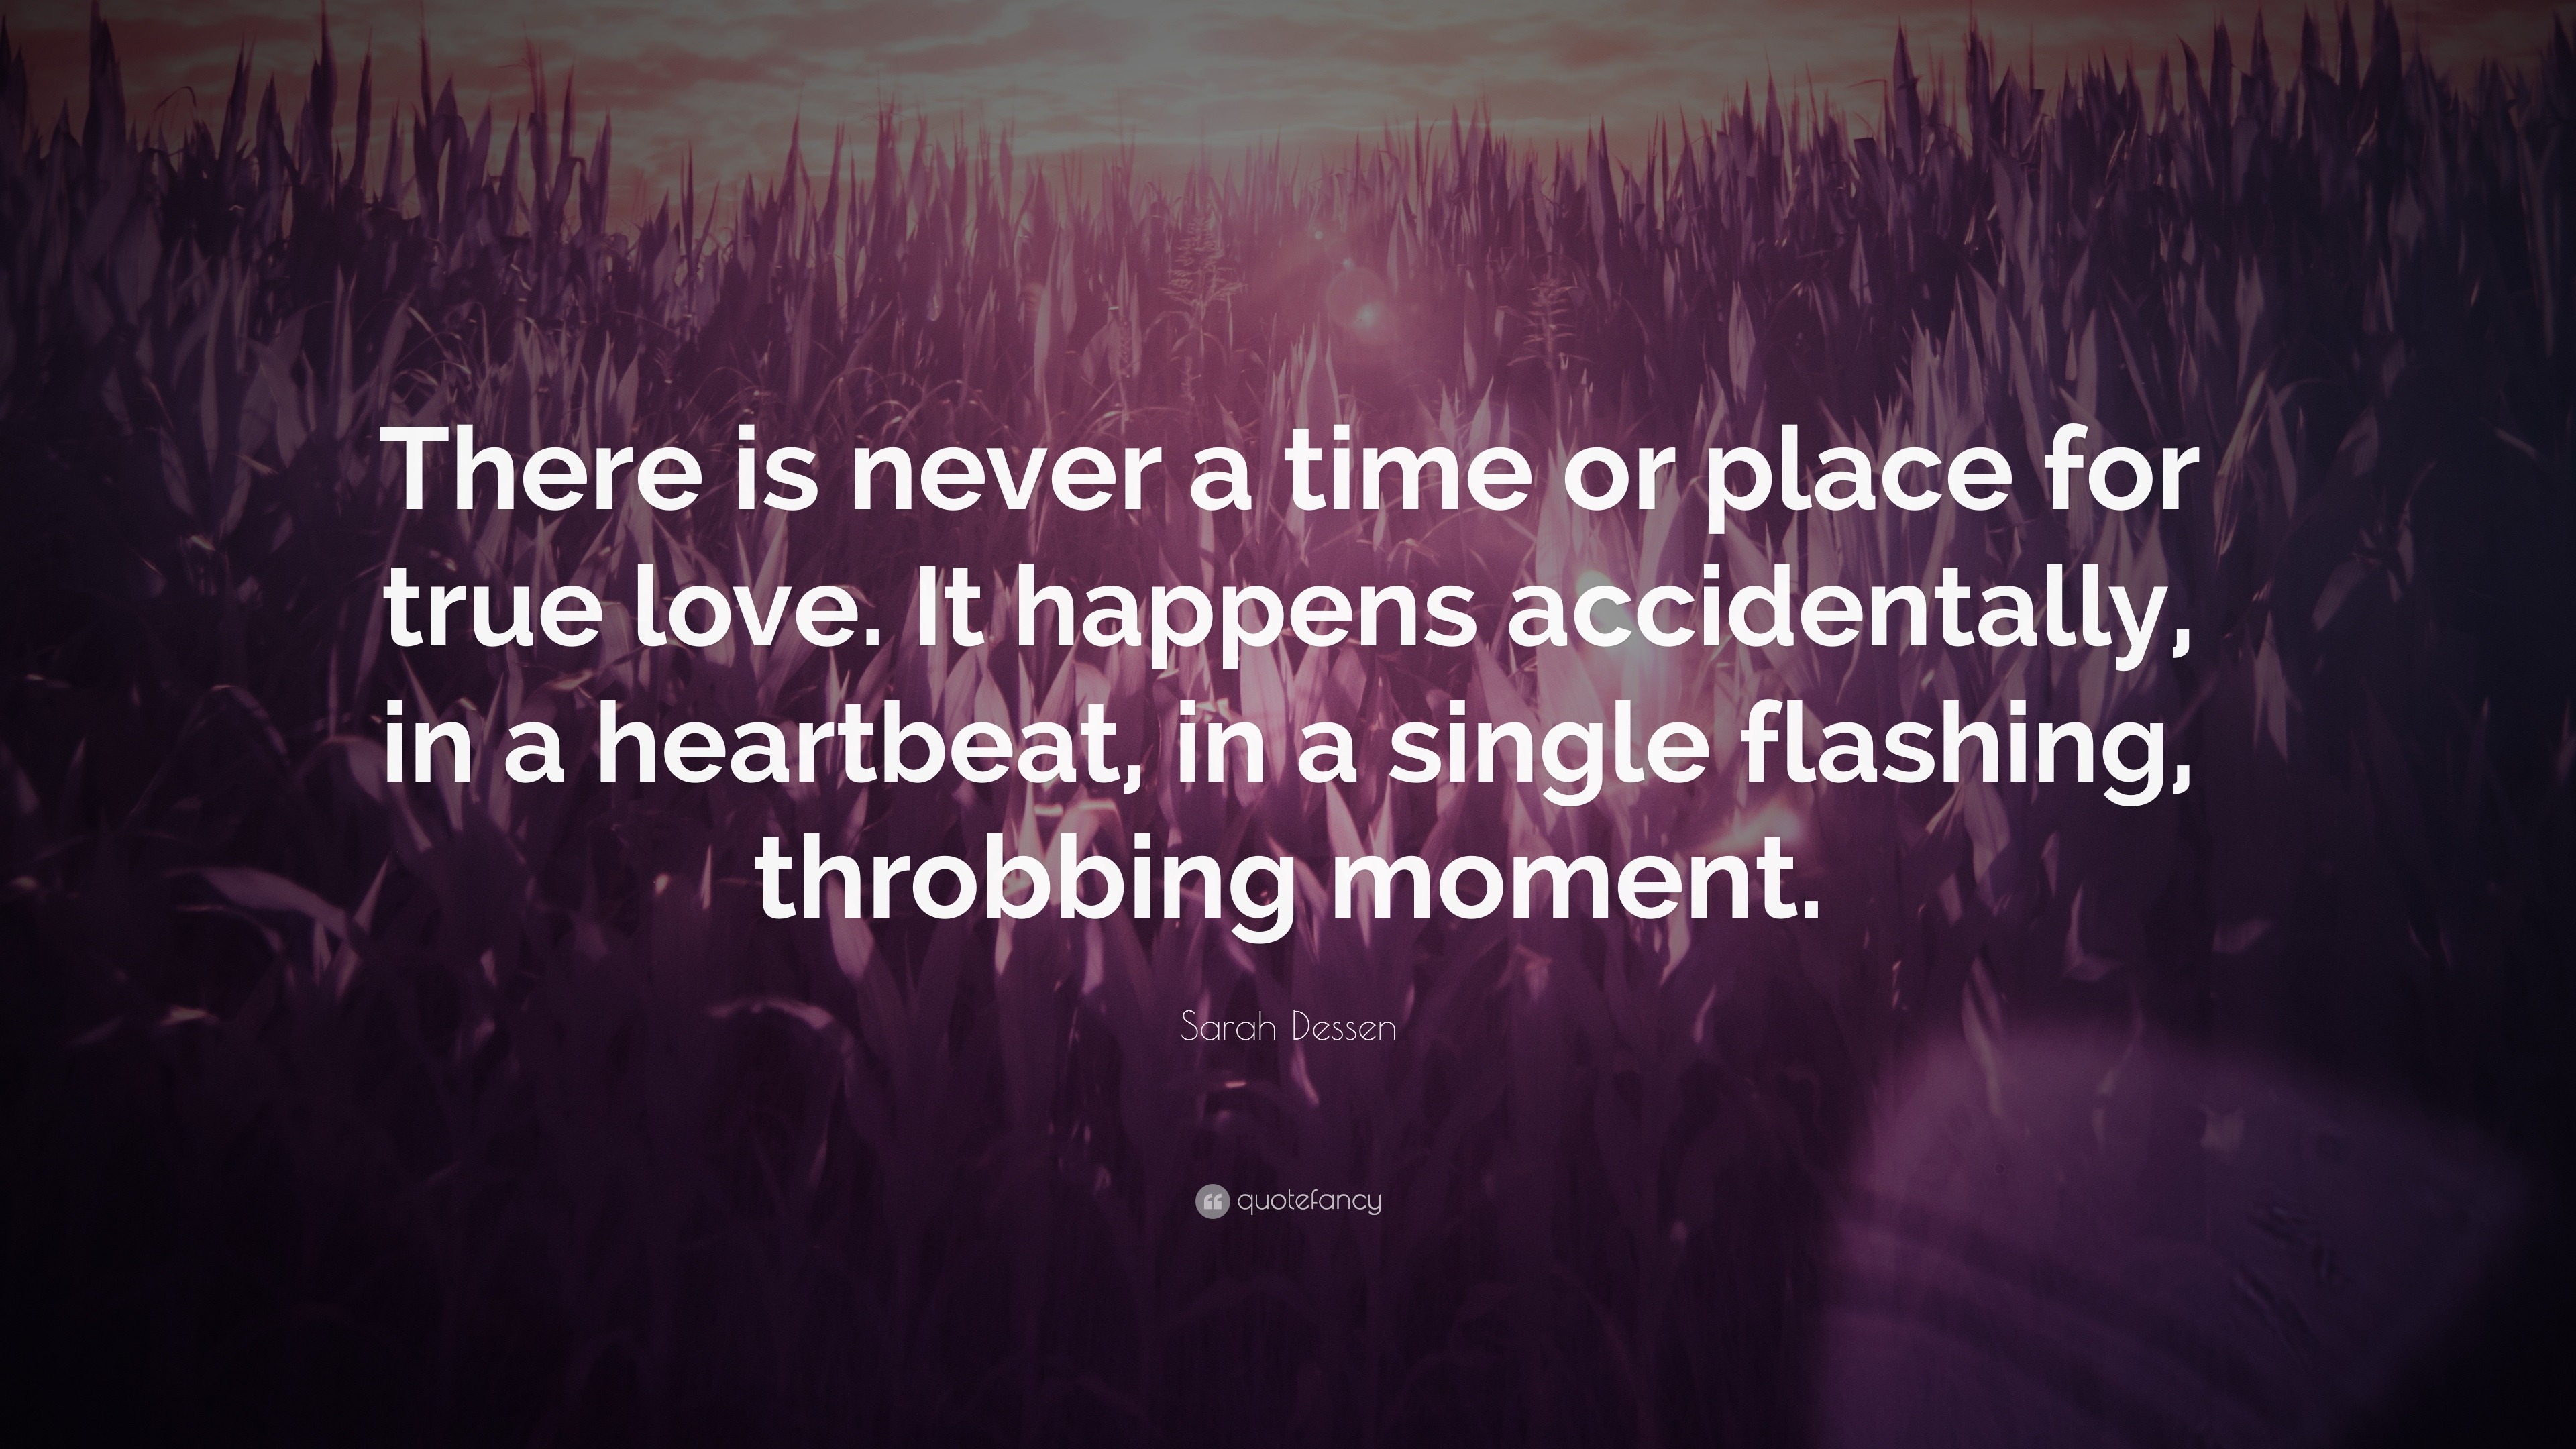 Sarah Dessen Quote “There is never a time or place for true love